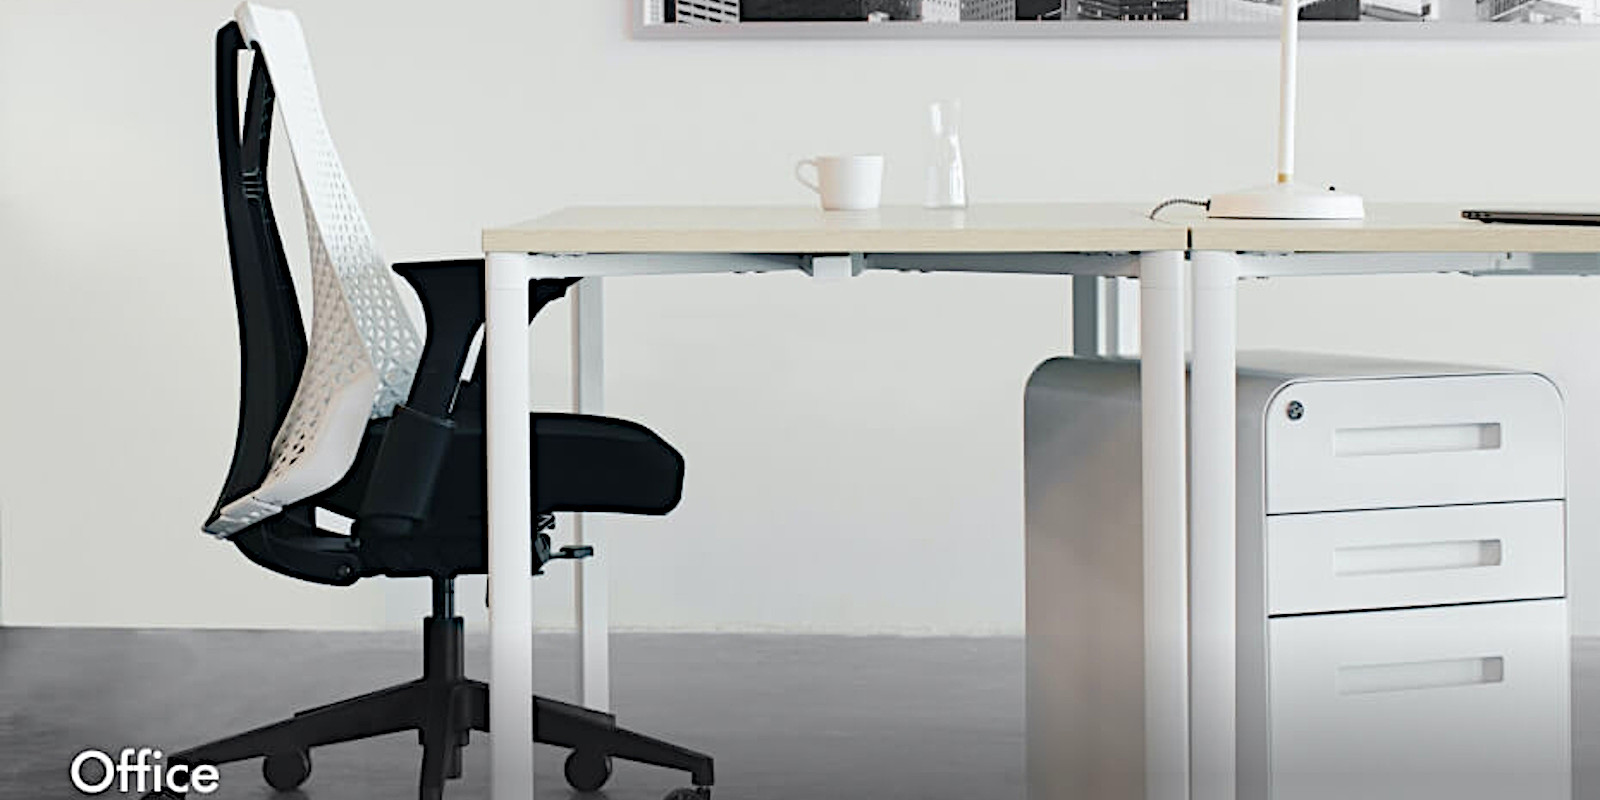 Office furniture at a discount